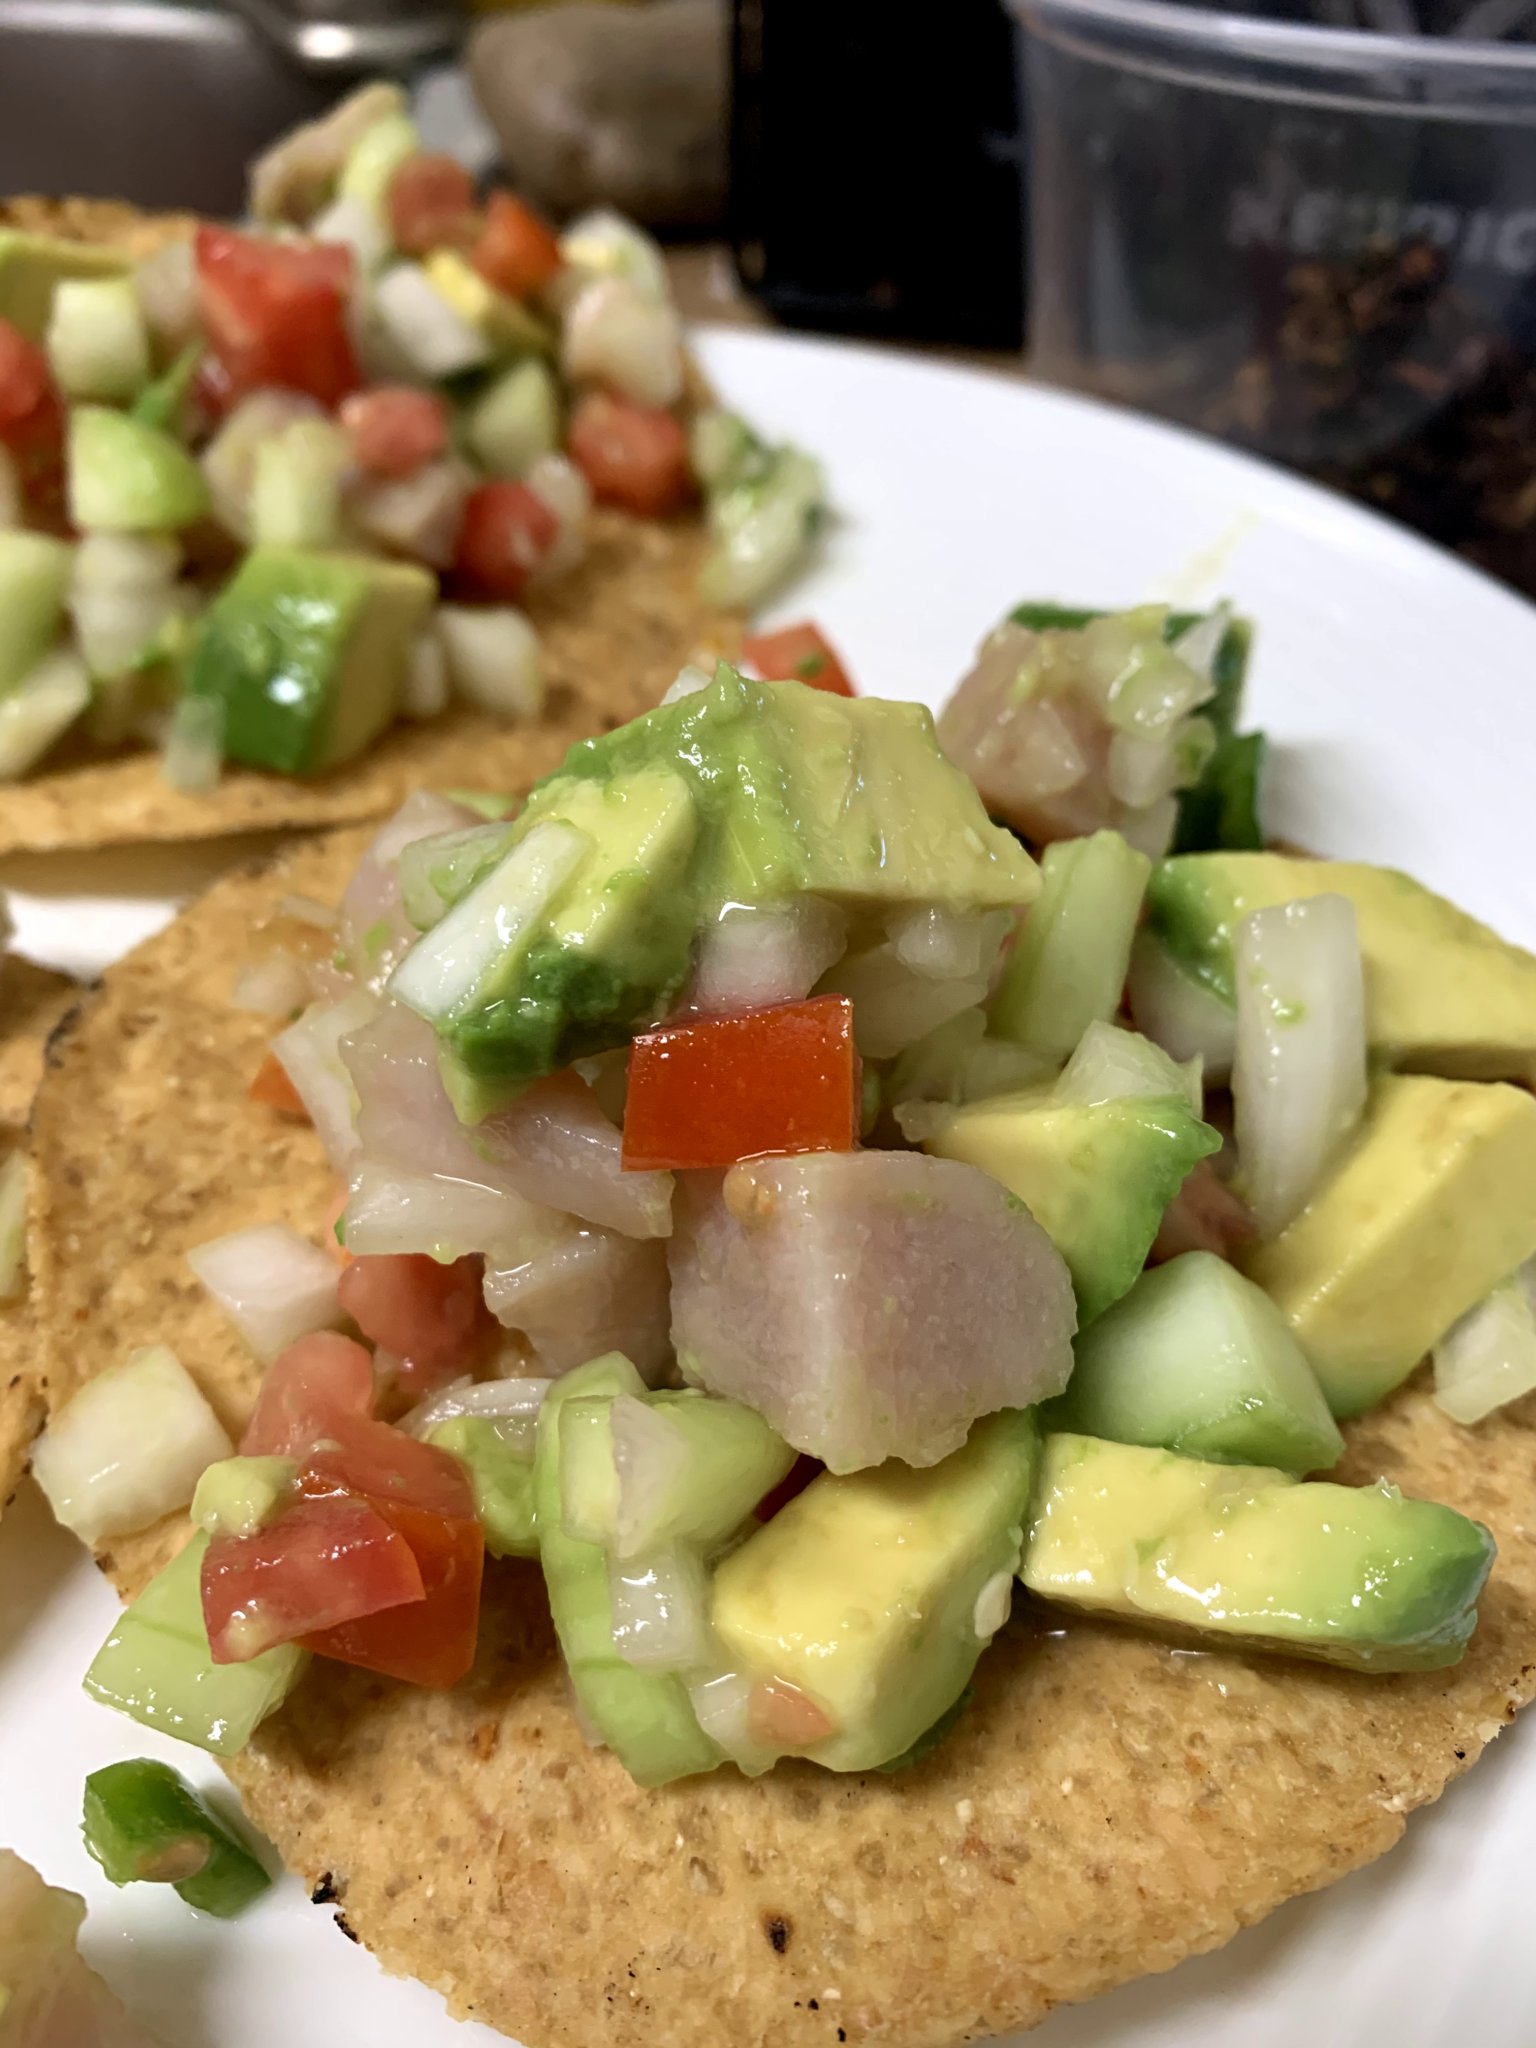 Diced fish, avocado, onion and tomato on top of a corn tostada